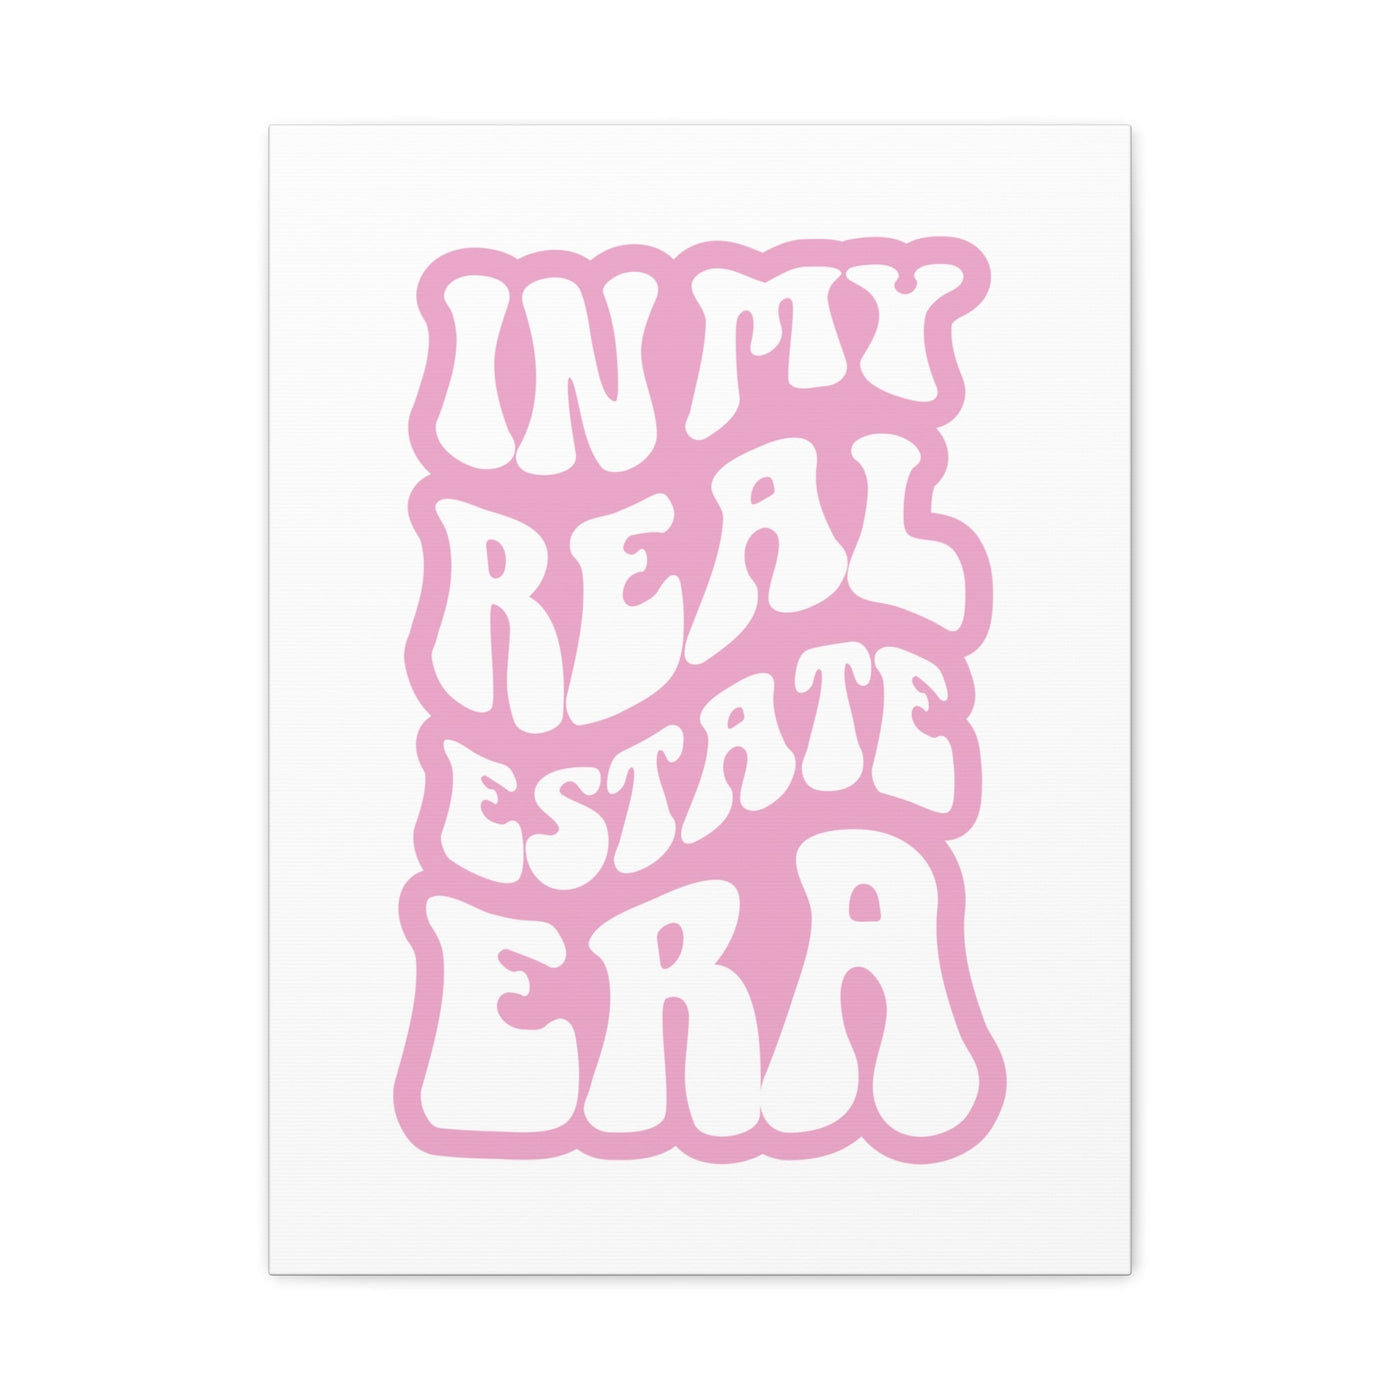 Wall Canvas - In My Real Estate Era - Pink Outline - All Things Real Estate